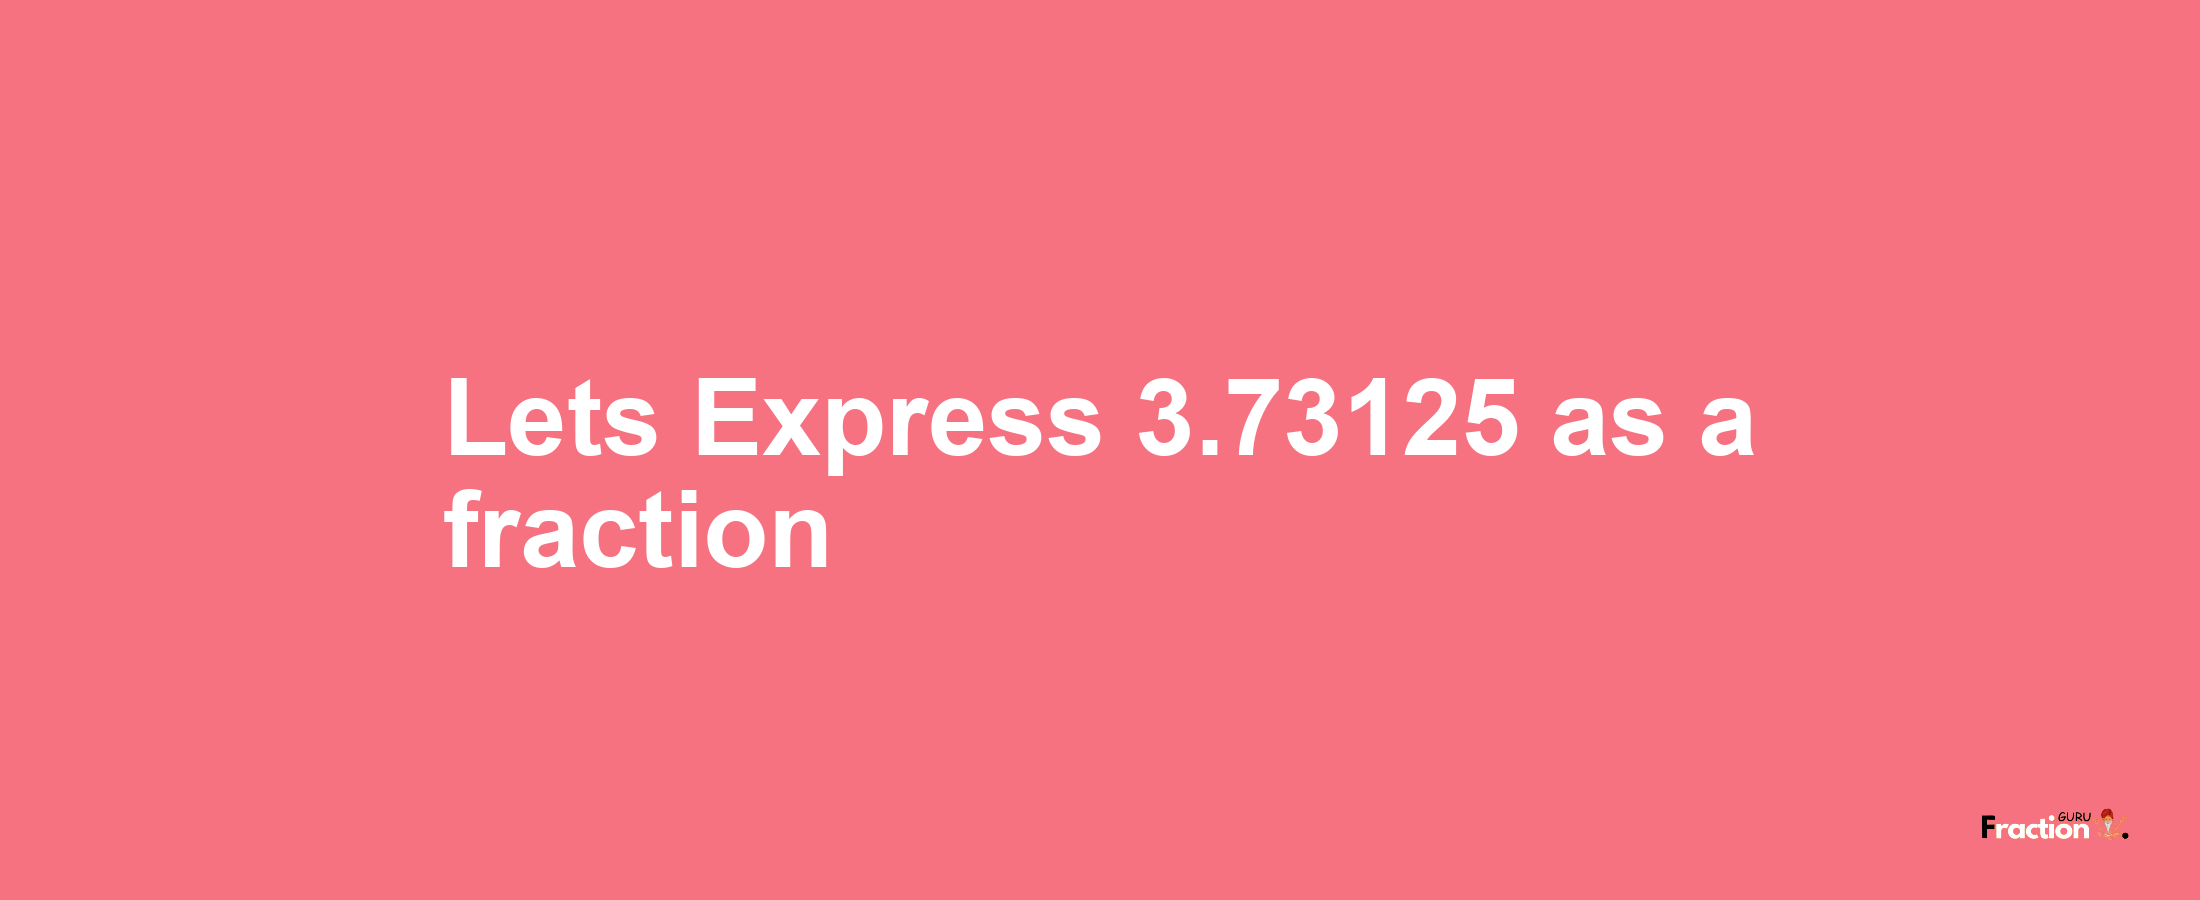 Lets Express 3.73125 as afraction